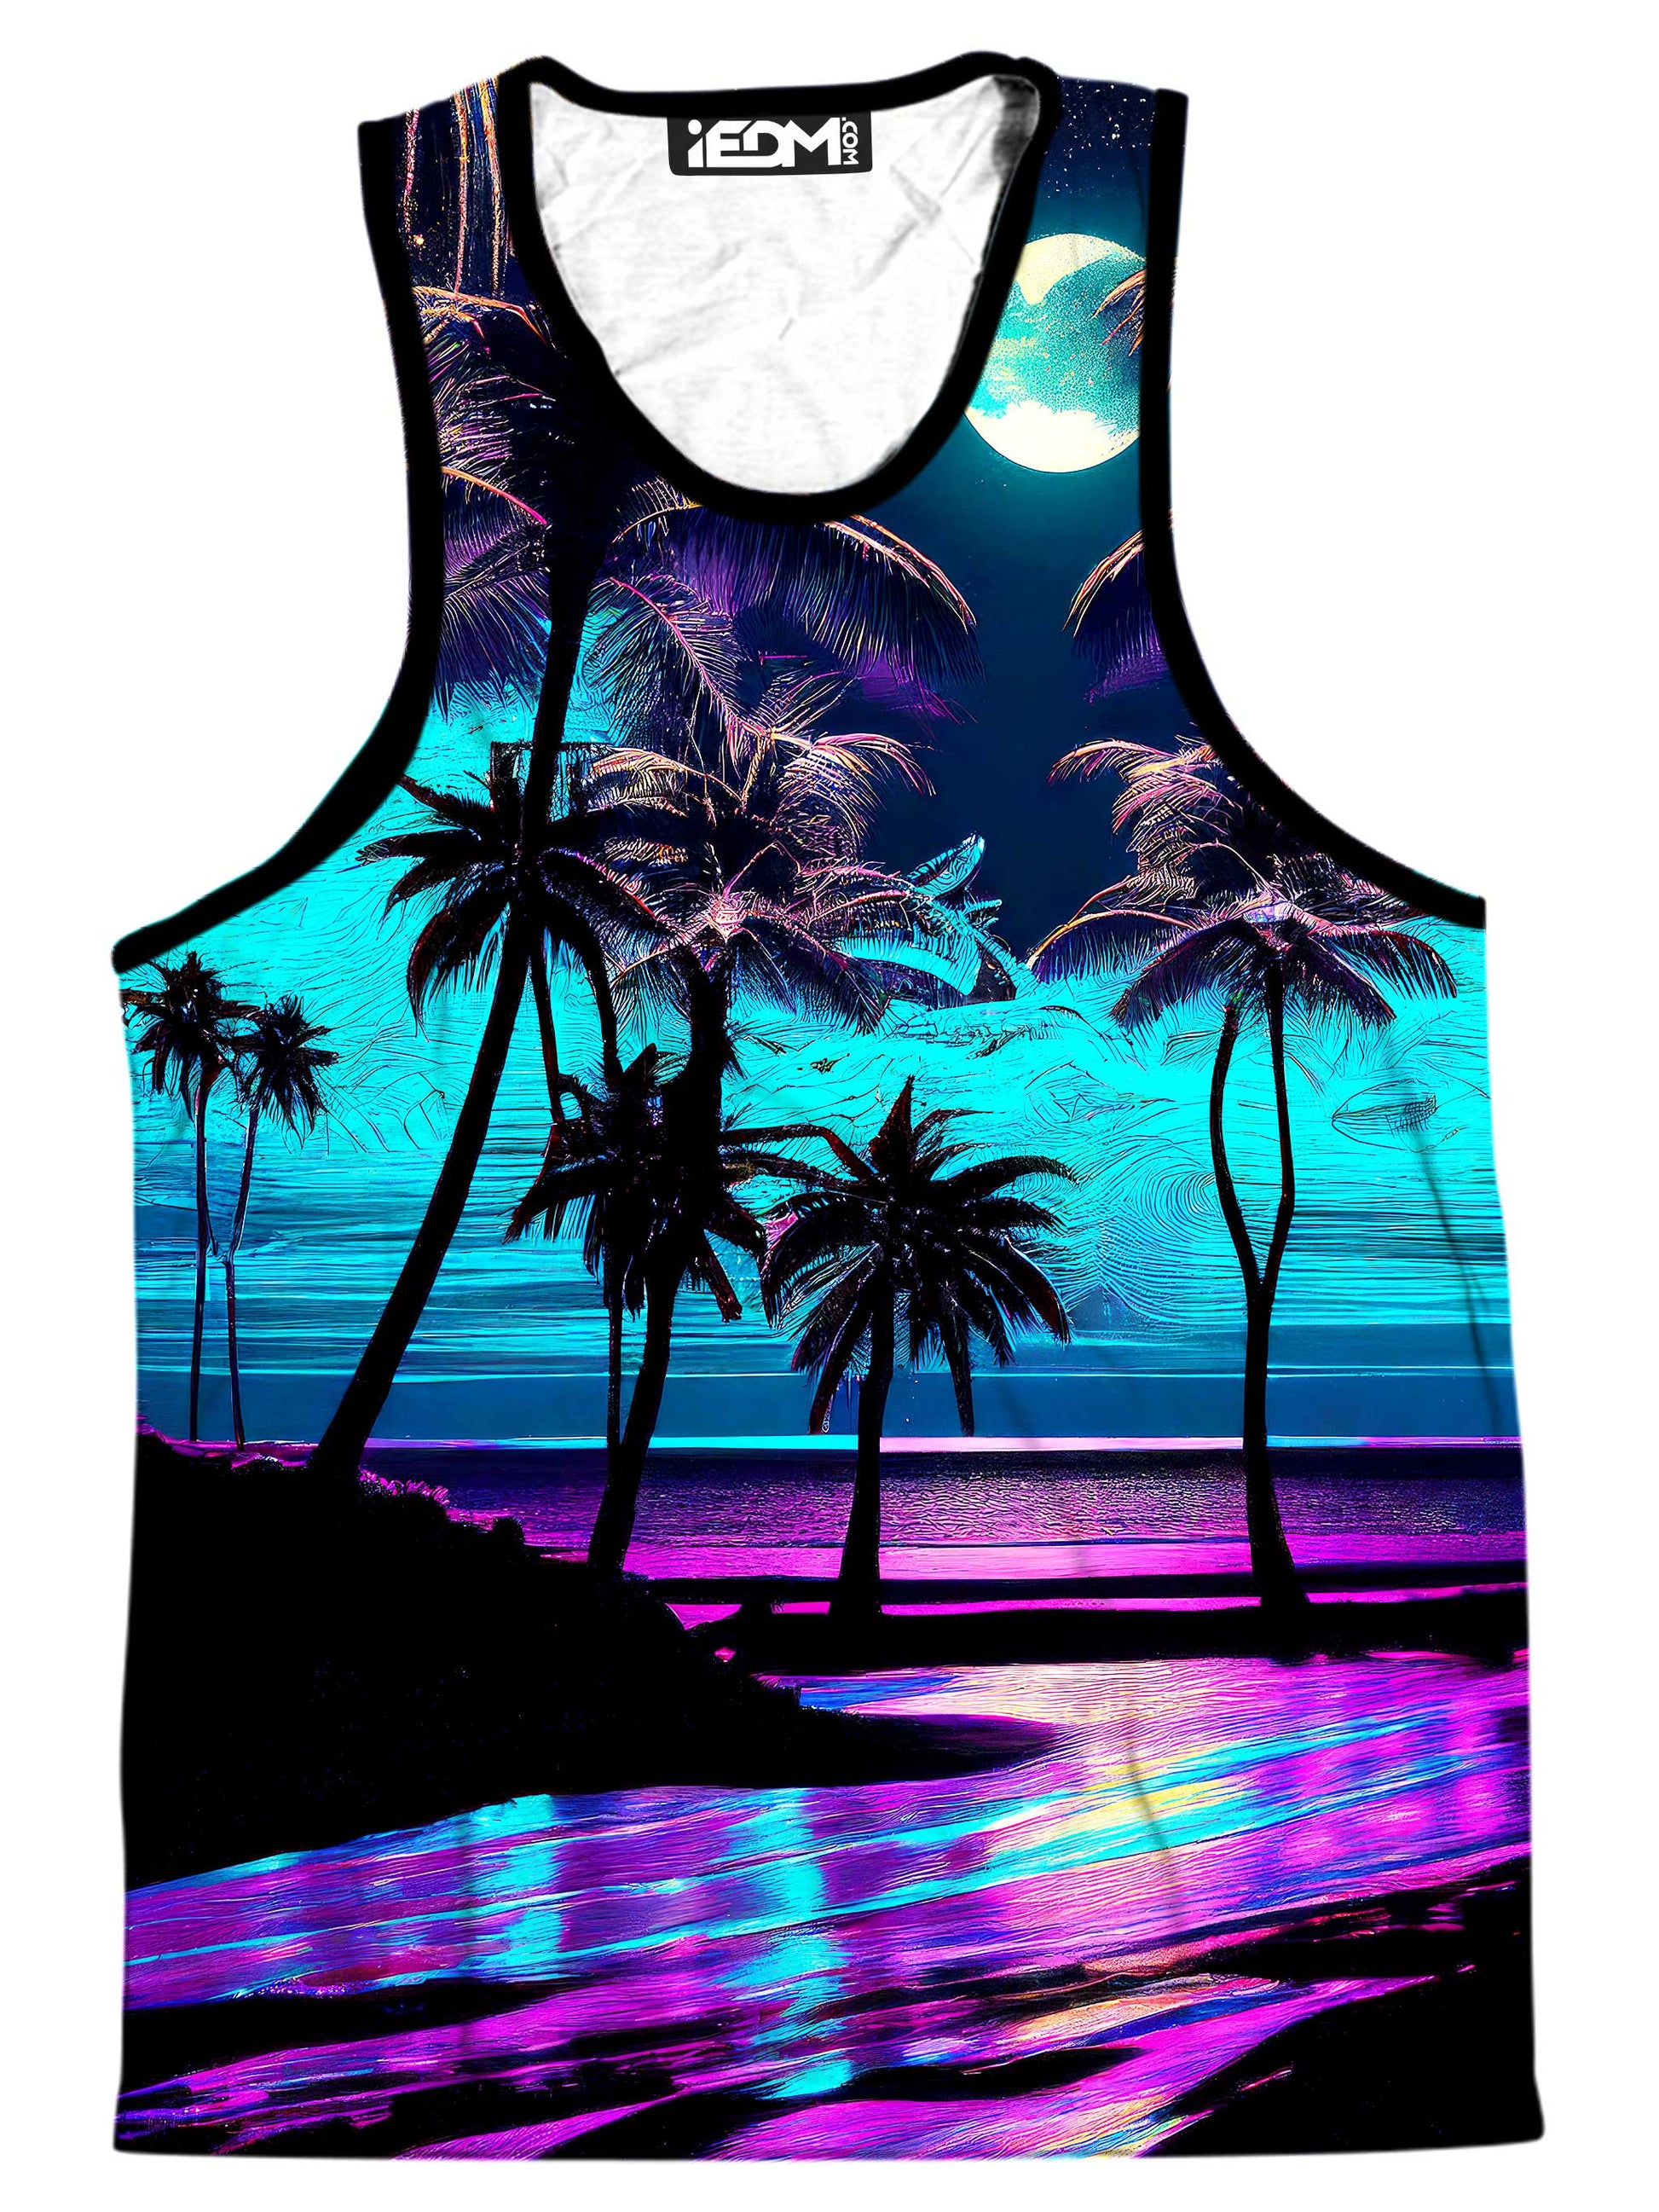 Spellbound Tank and Shorts Combo, iEDM, | iEDM